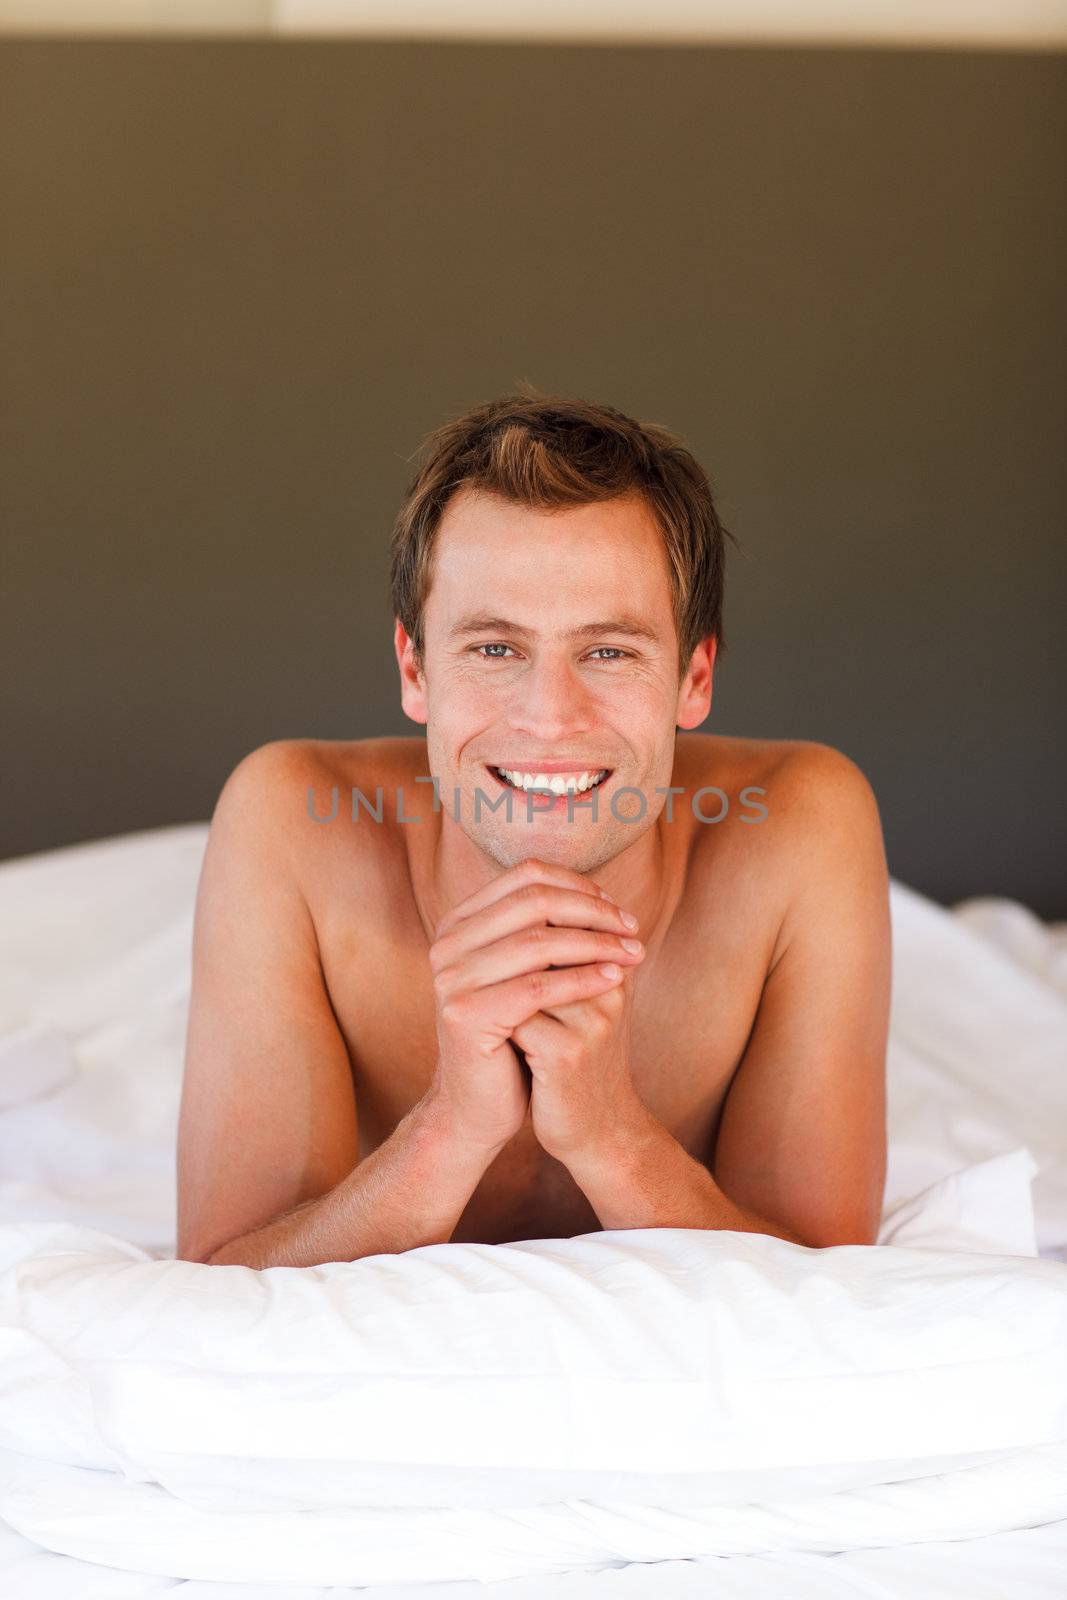 Smiling handsome young boy lying in bed with copy-space